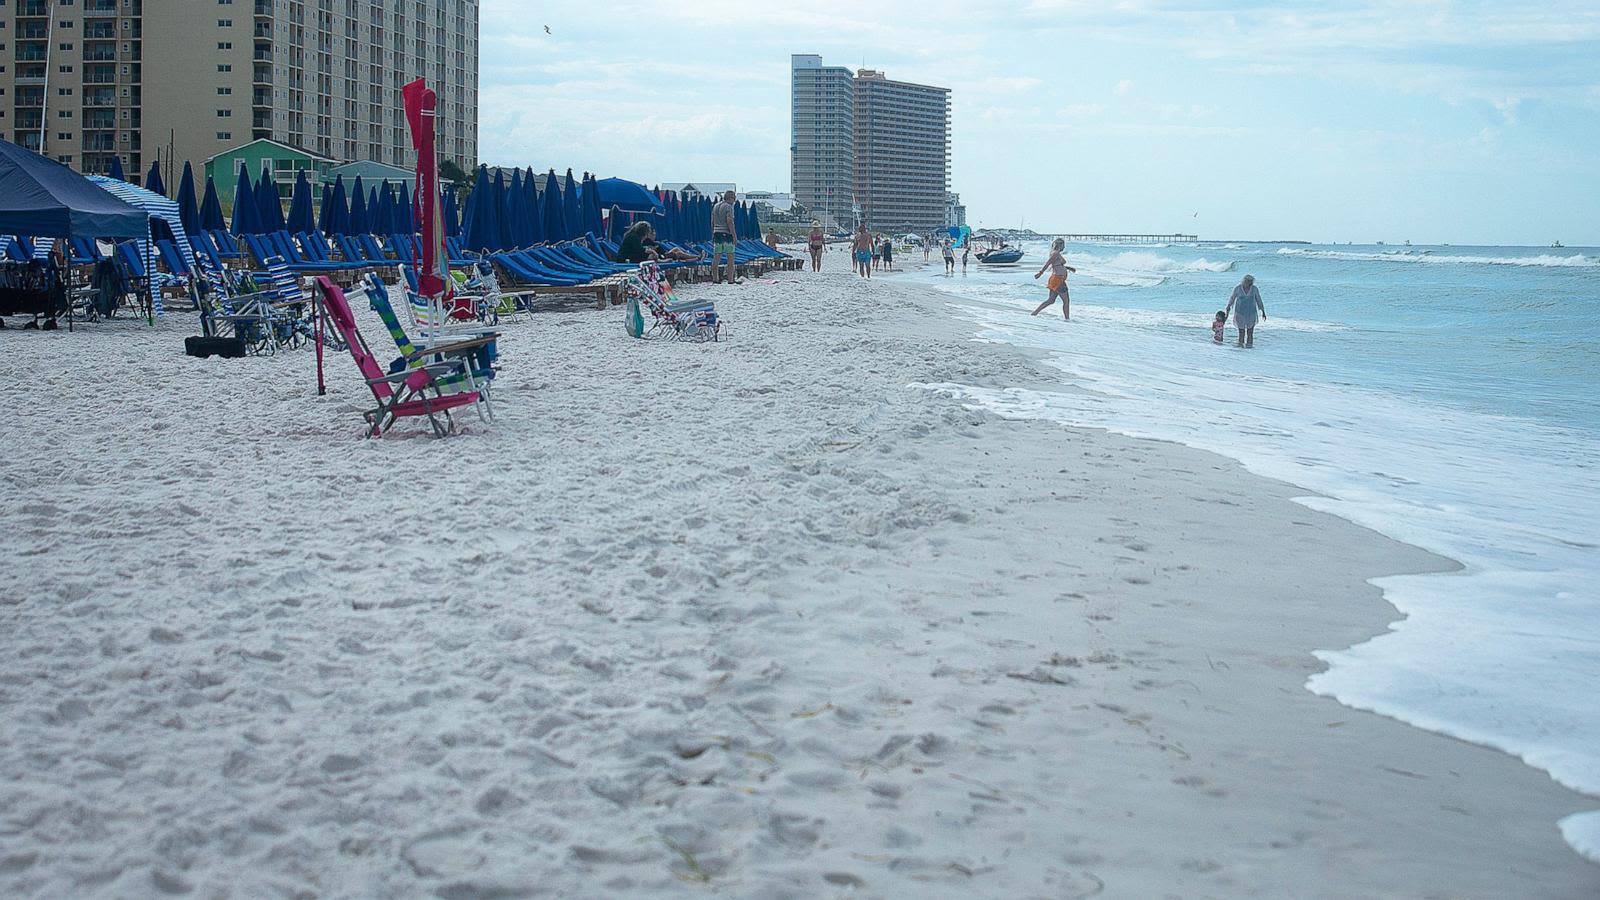 3 young men drown while swimming in Gulf Coast off Florida shores: Police